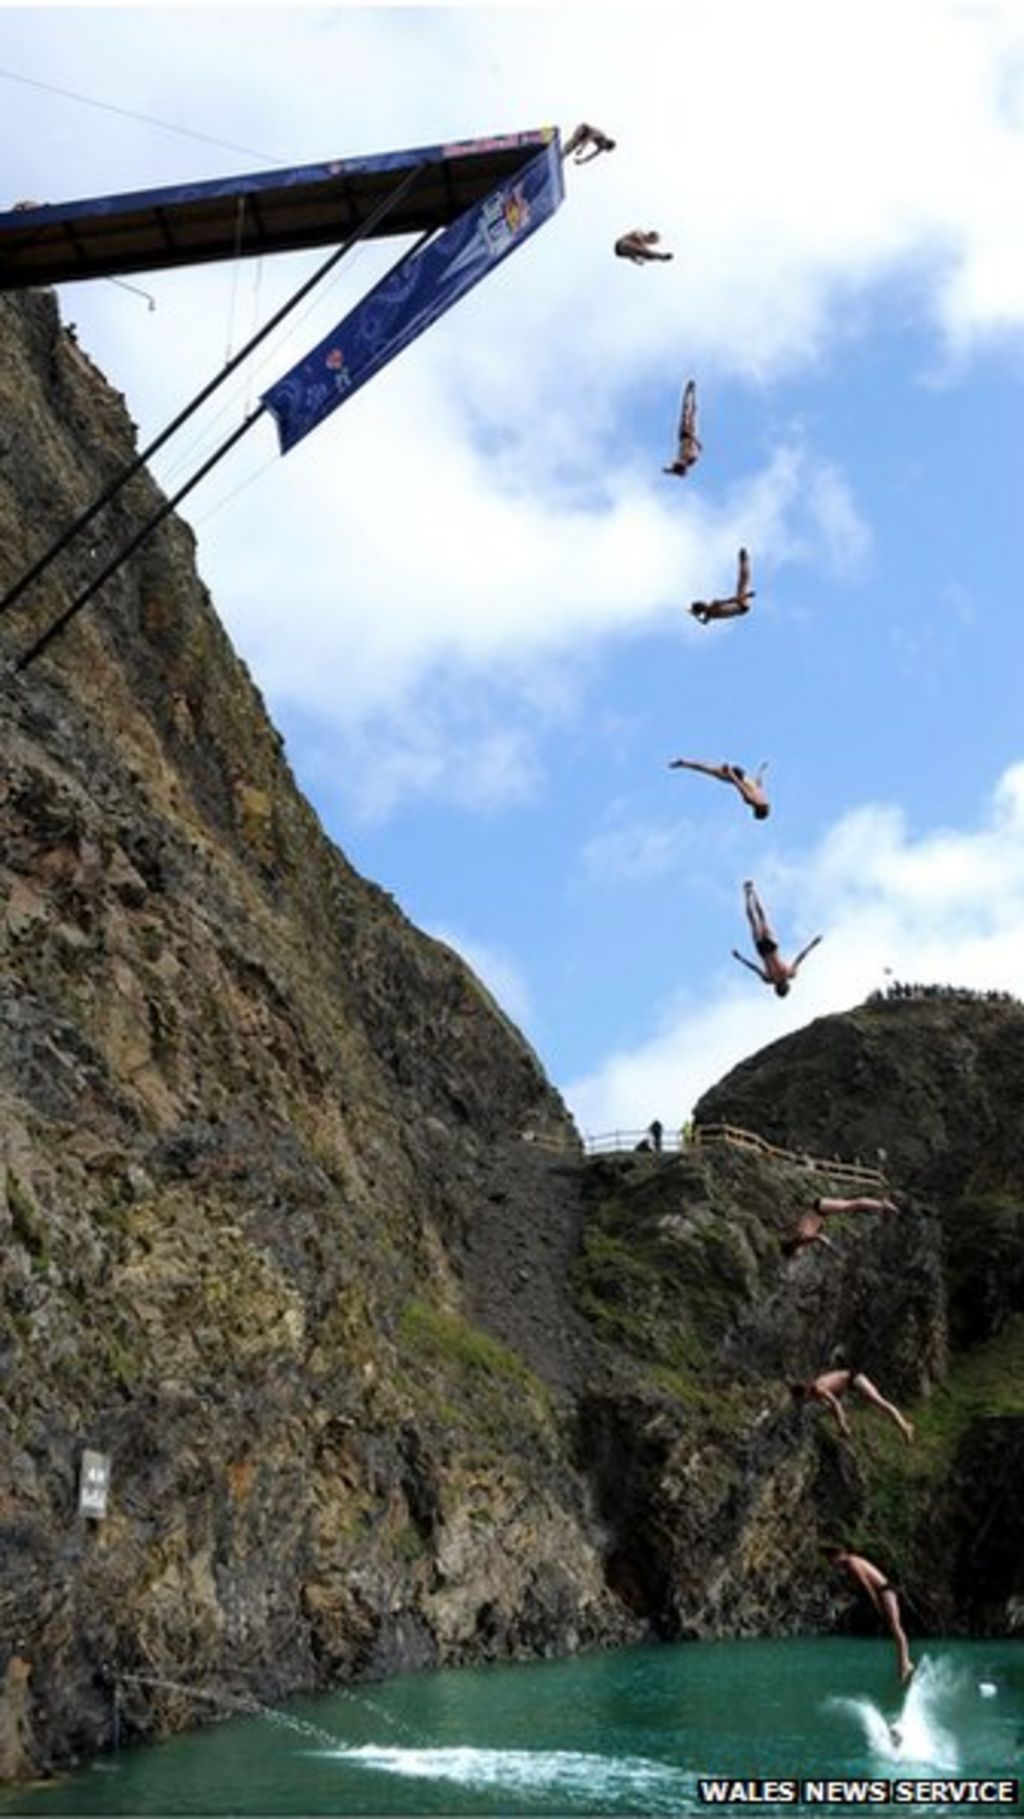 Red Bull Cliff Diving World Series' Pembrokeshire UK debut BBC News